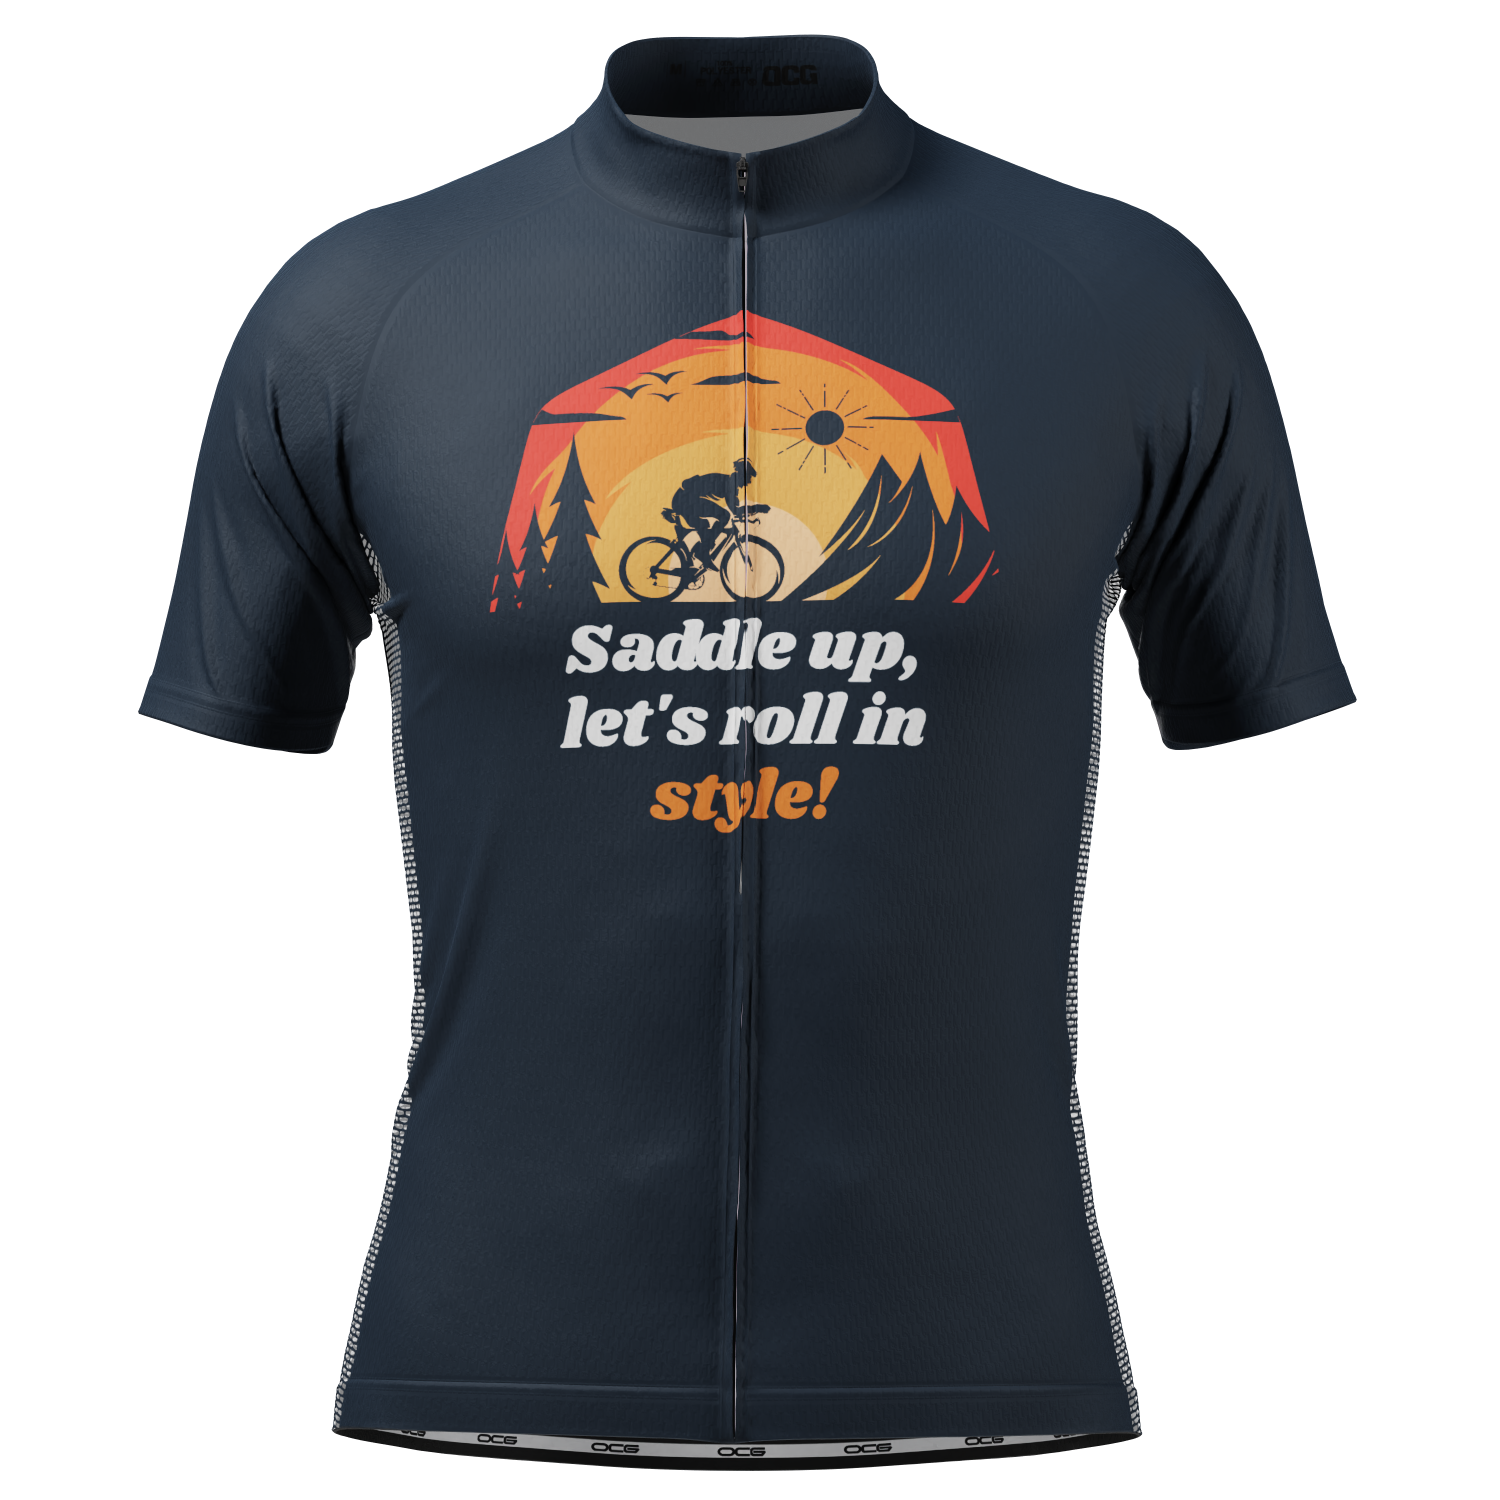 Men's Saddle Up, Let's Roll In Style! Short Sleeve Cycling Jersey